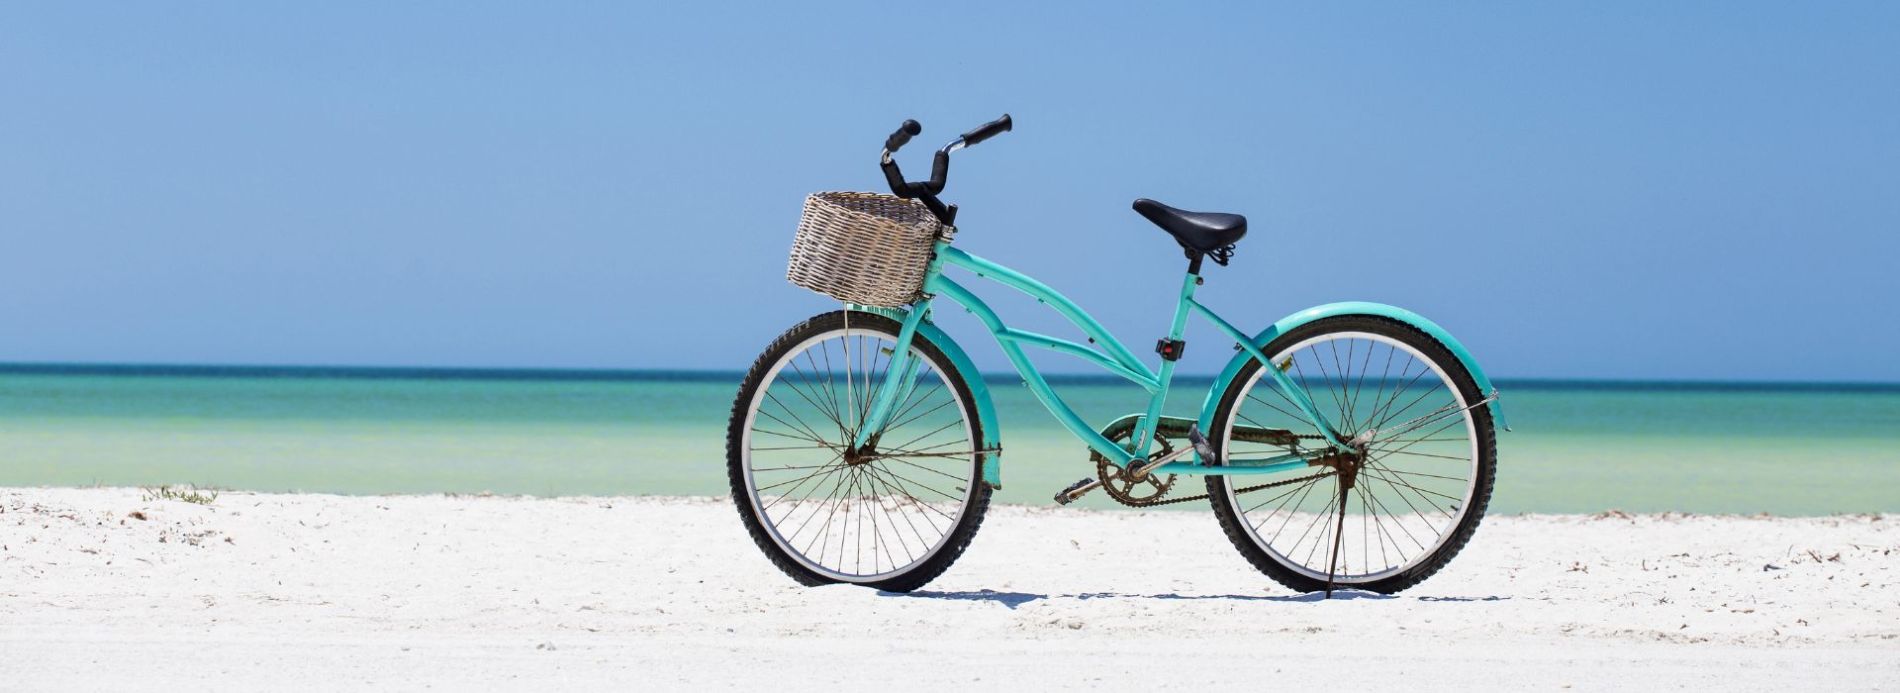 bicycle on ami beach